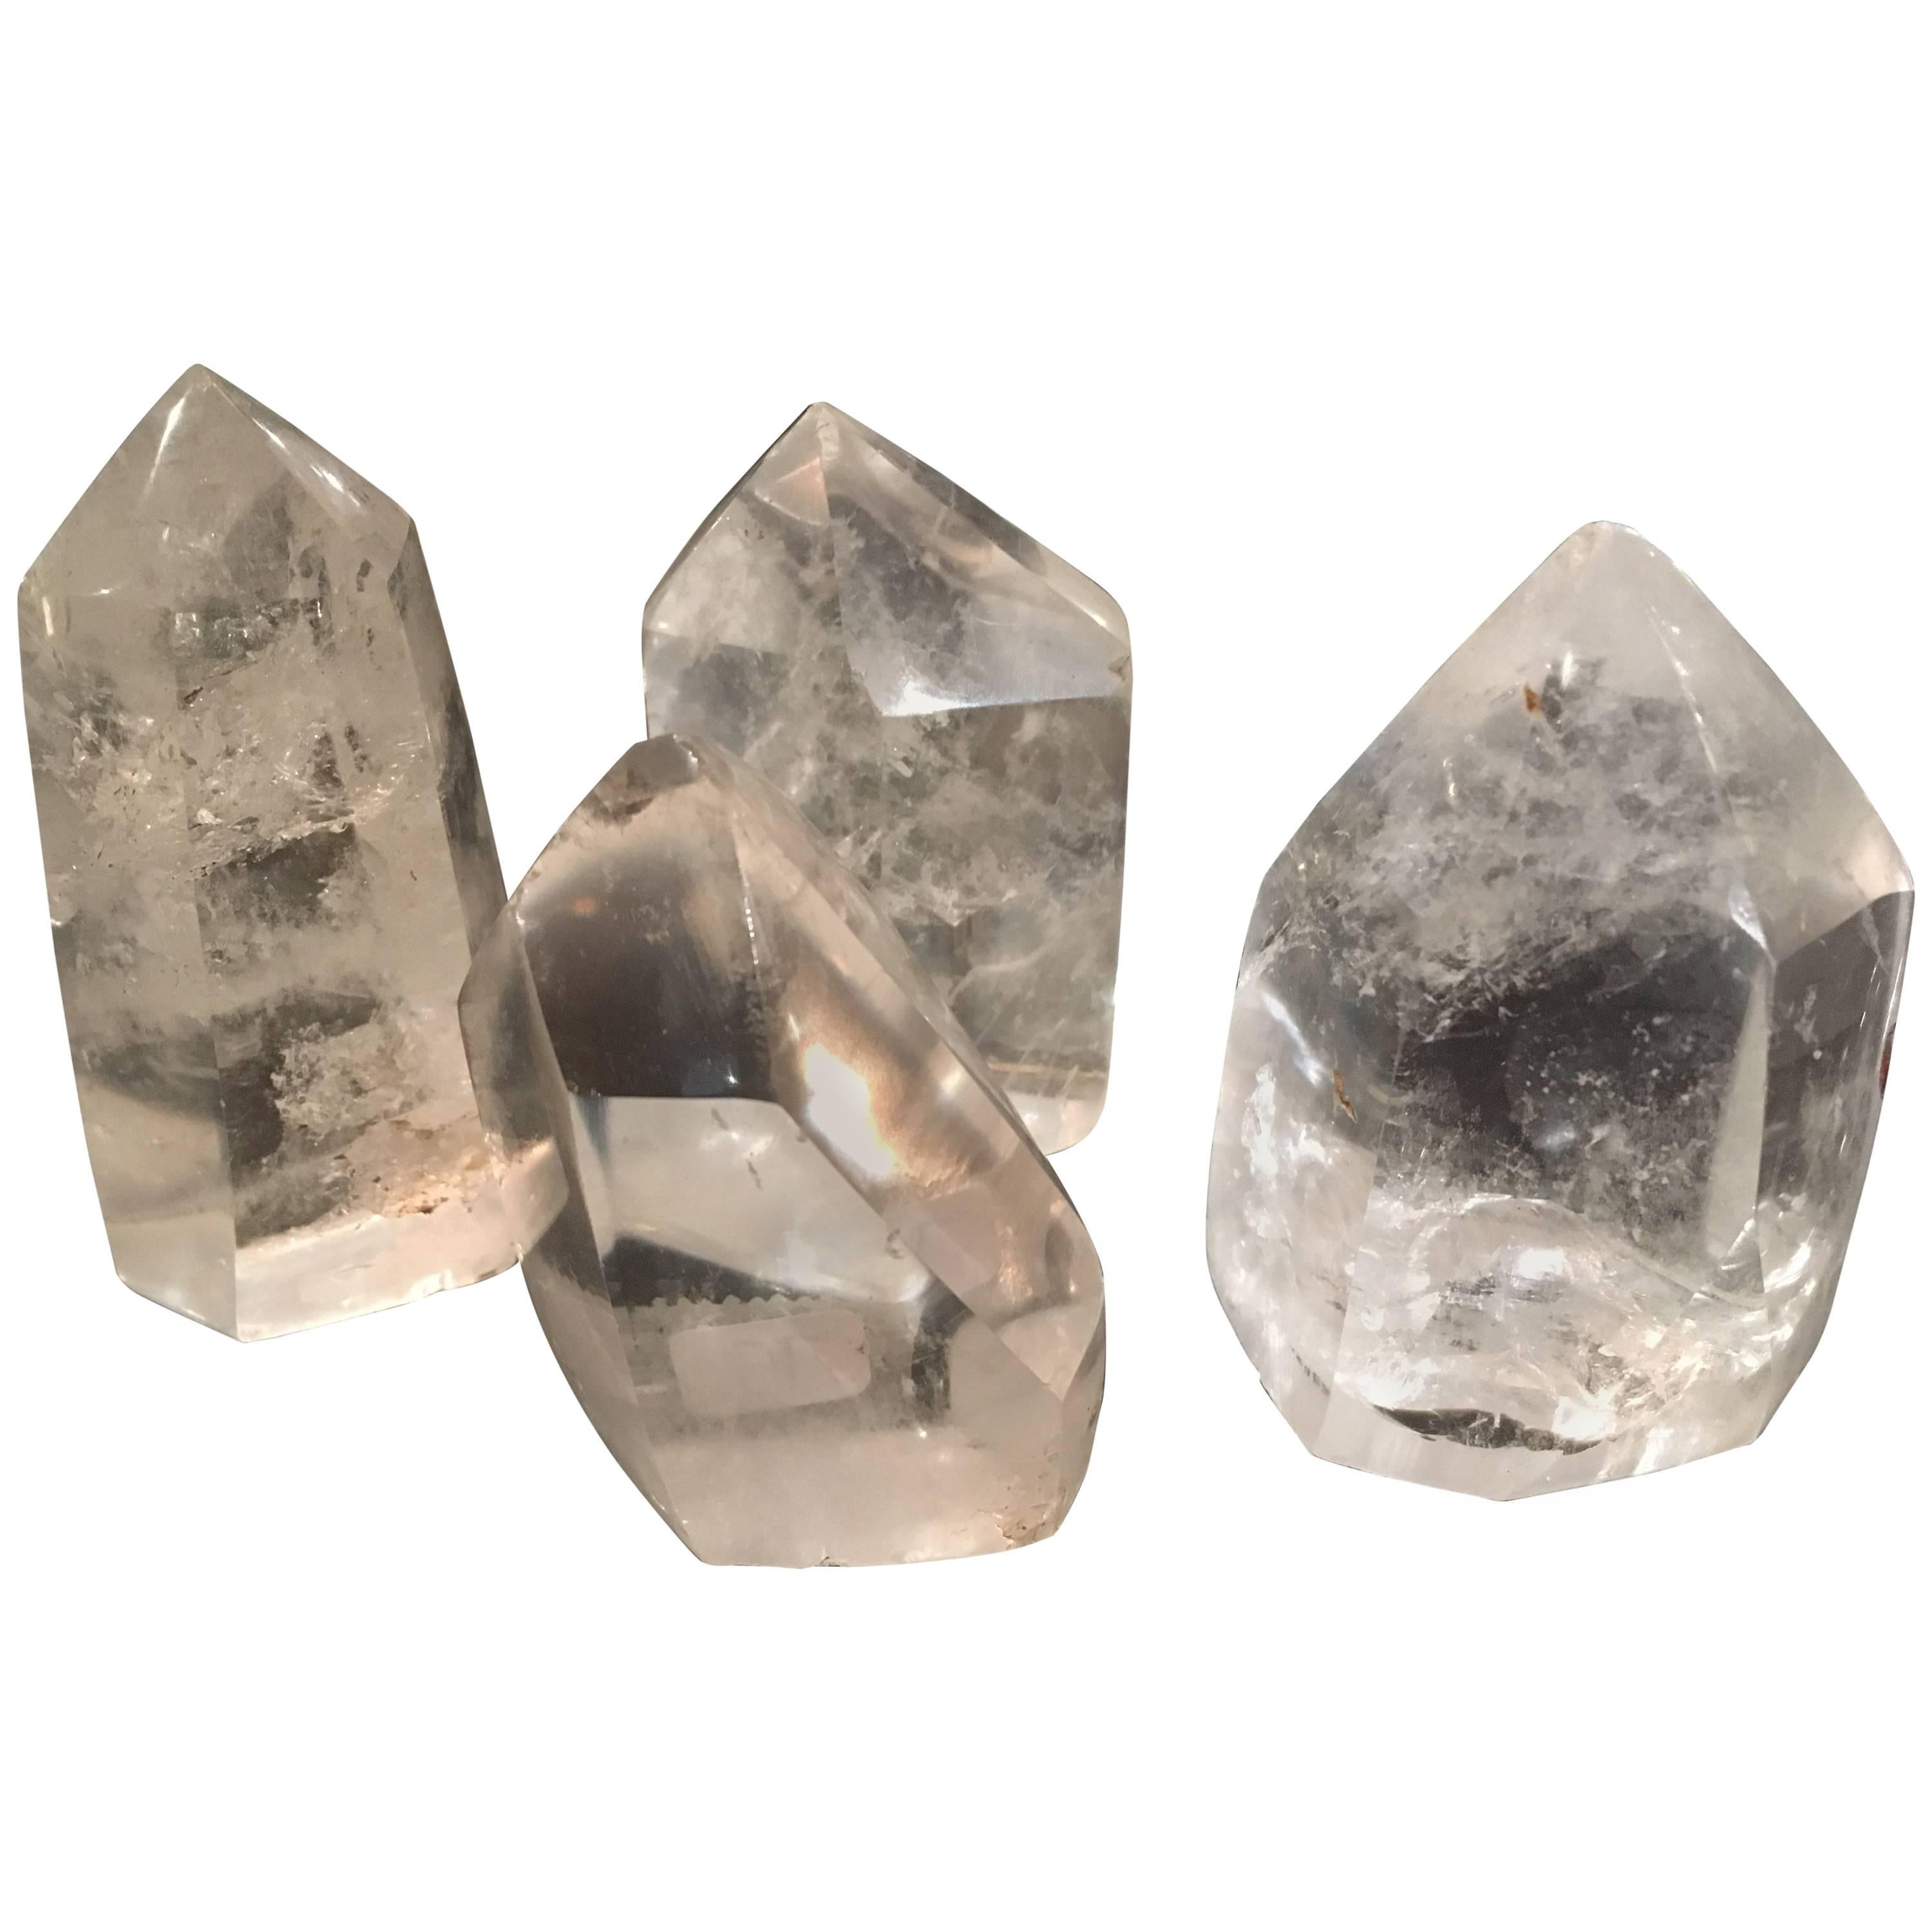 Group of Four Small Crystals